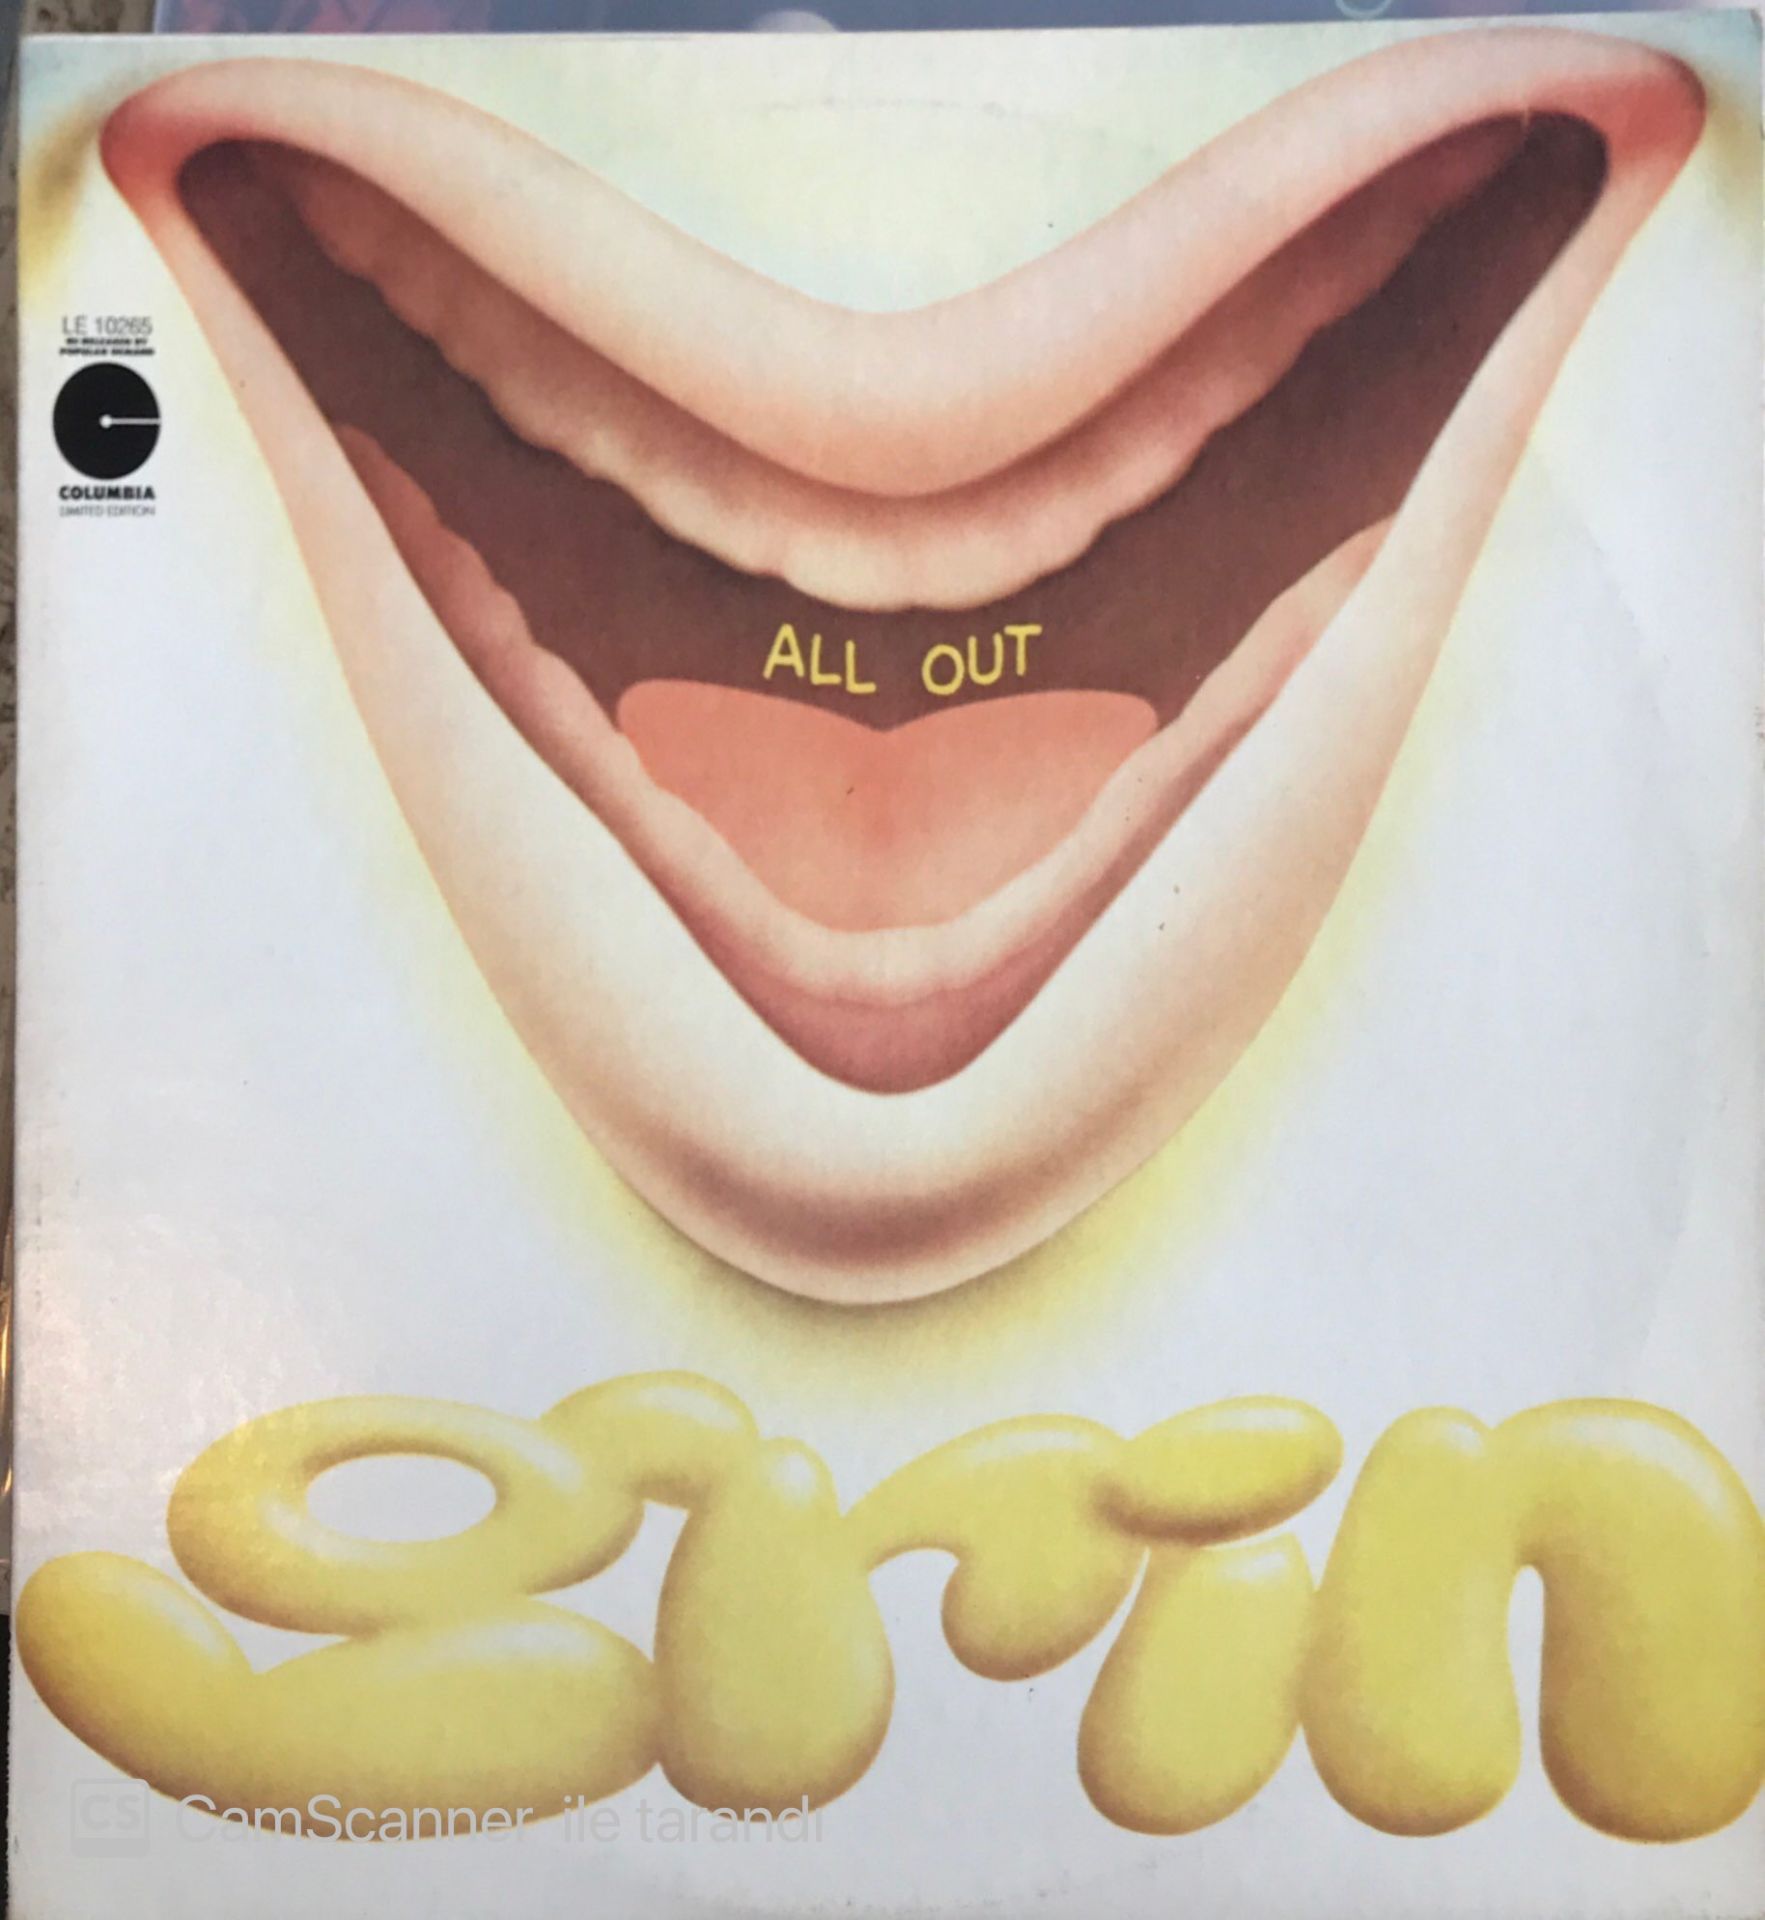 Grin - All Out LP